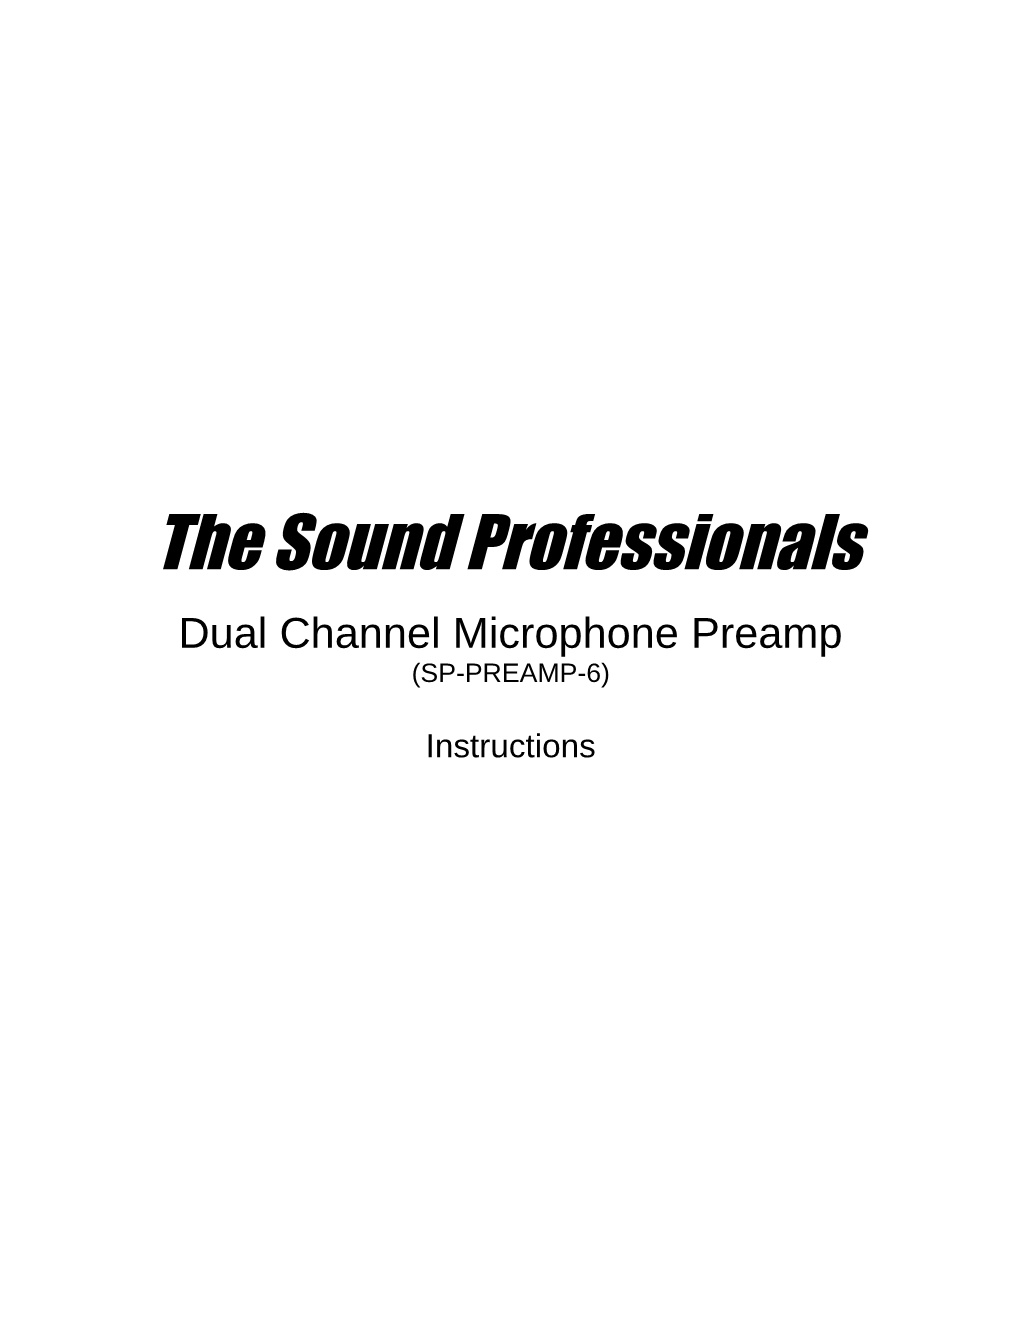 Dual Channel Microphone Preamp